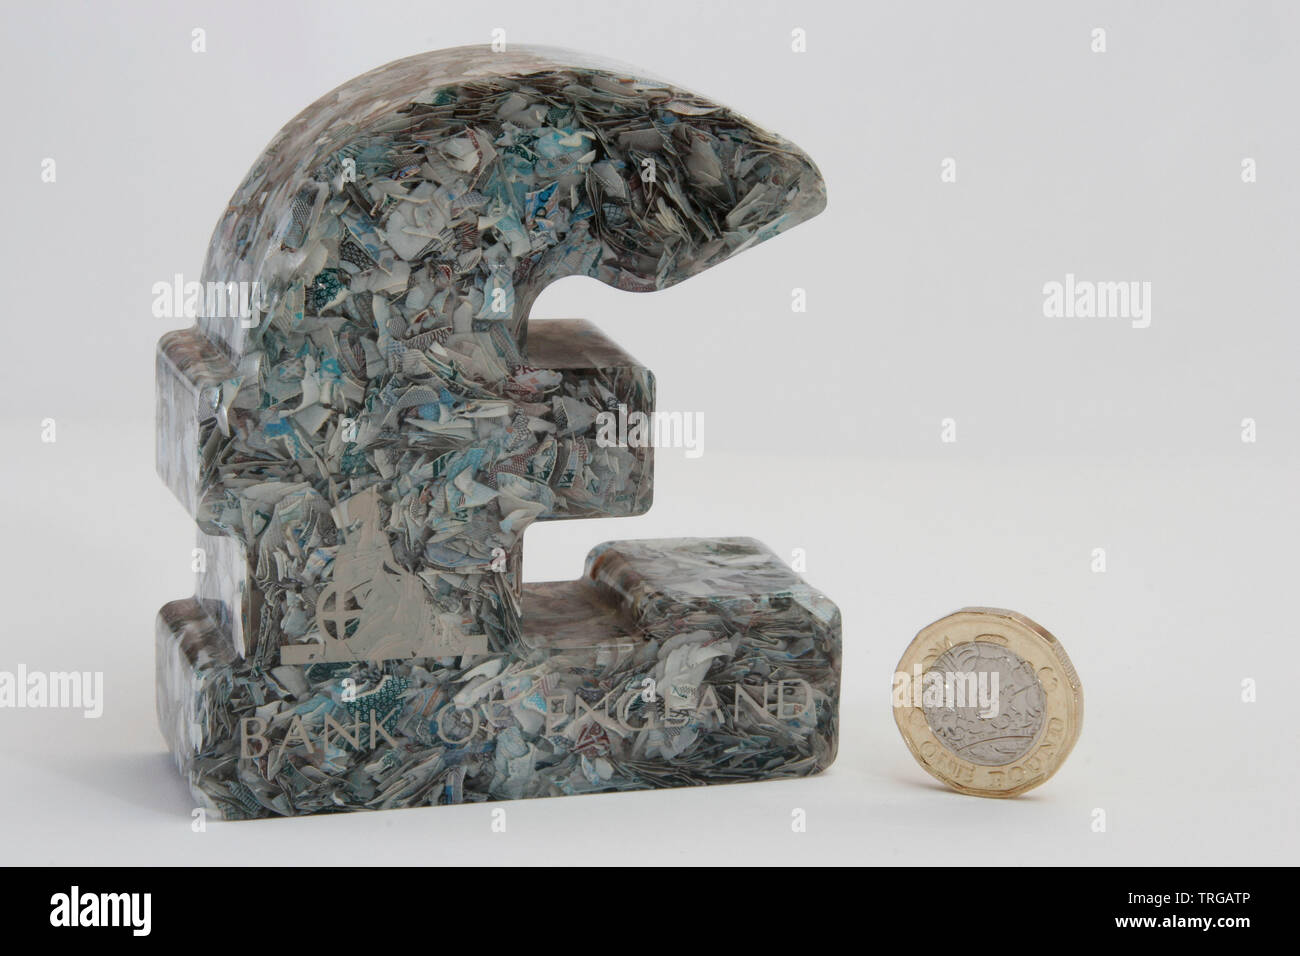 British Pound paper weight made from chopped up £5 notes next to £1 coin UK Stock Photo